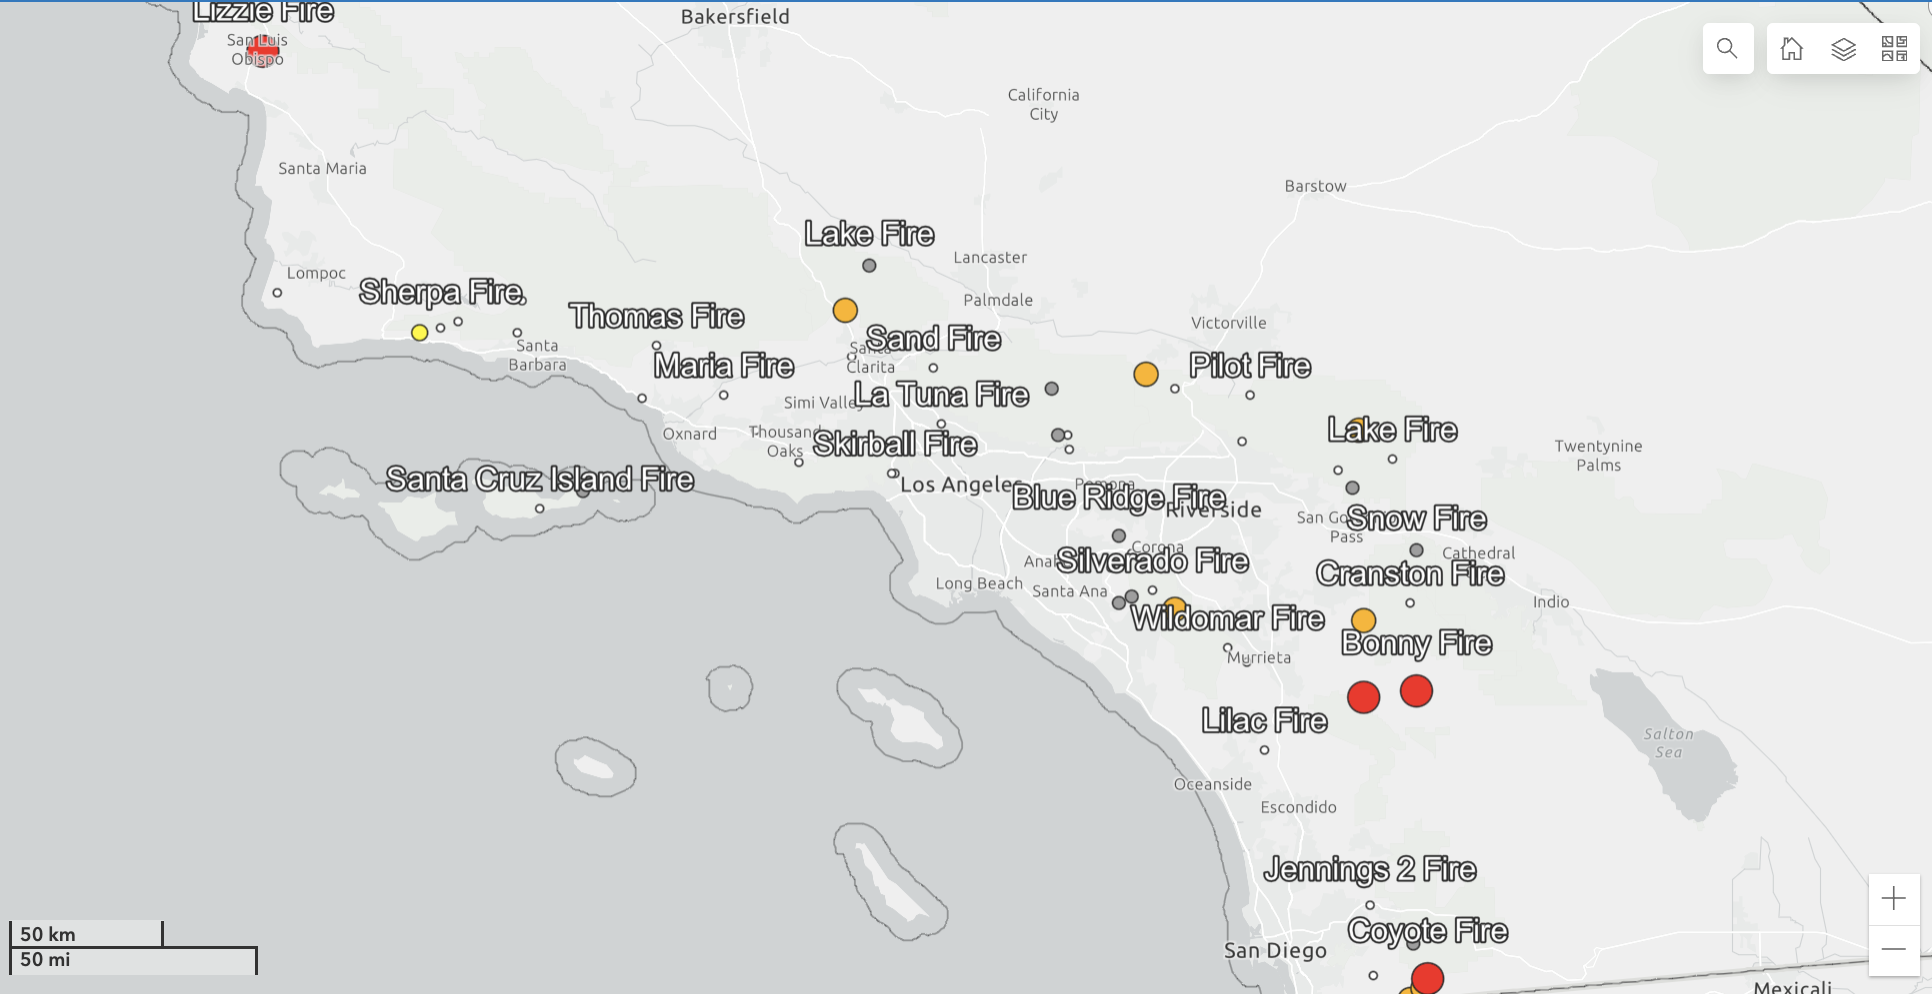 Map showing landslide monitored locations across Southern California